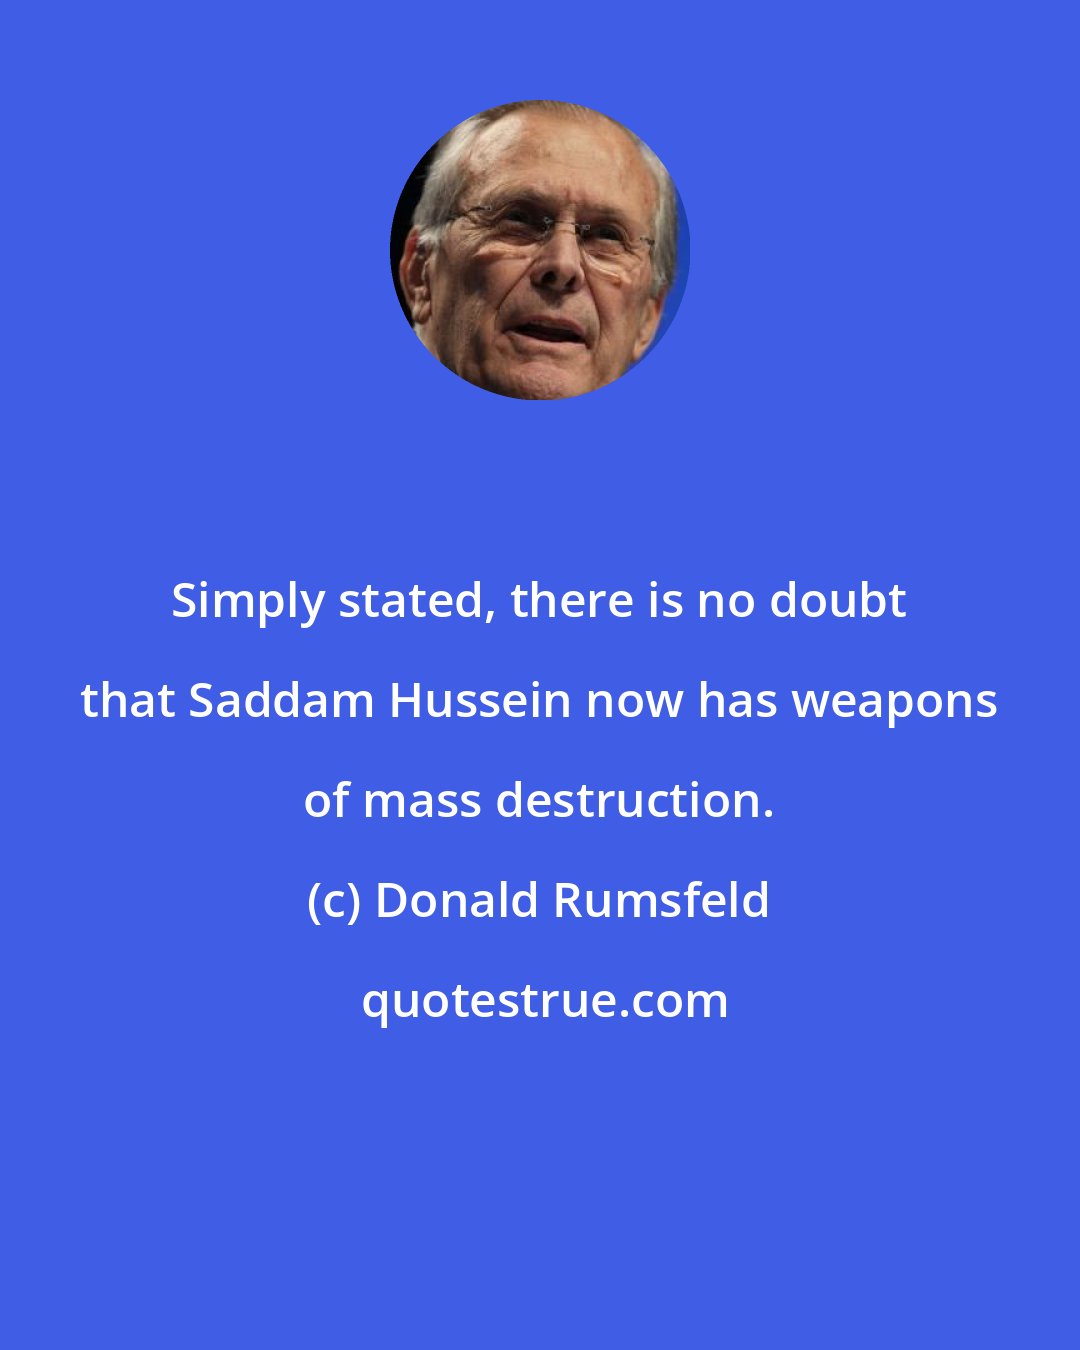 Donald Rumsfeld: Simply stated, there is no doubt that Saddam Hussein now has weapons of mass destruction.